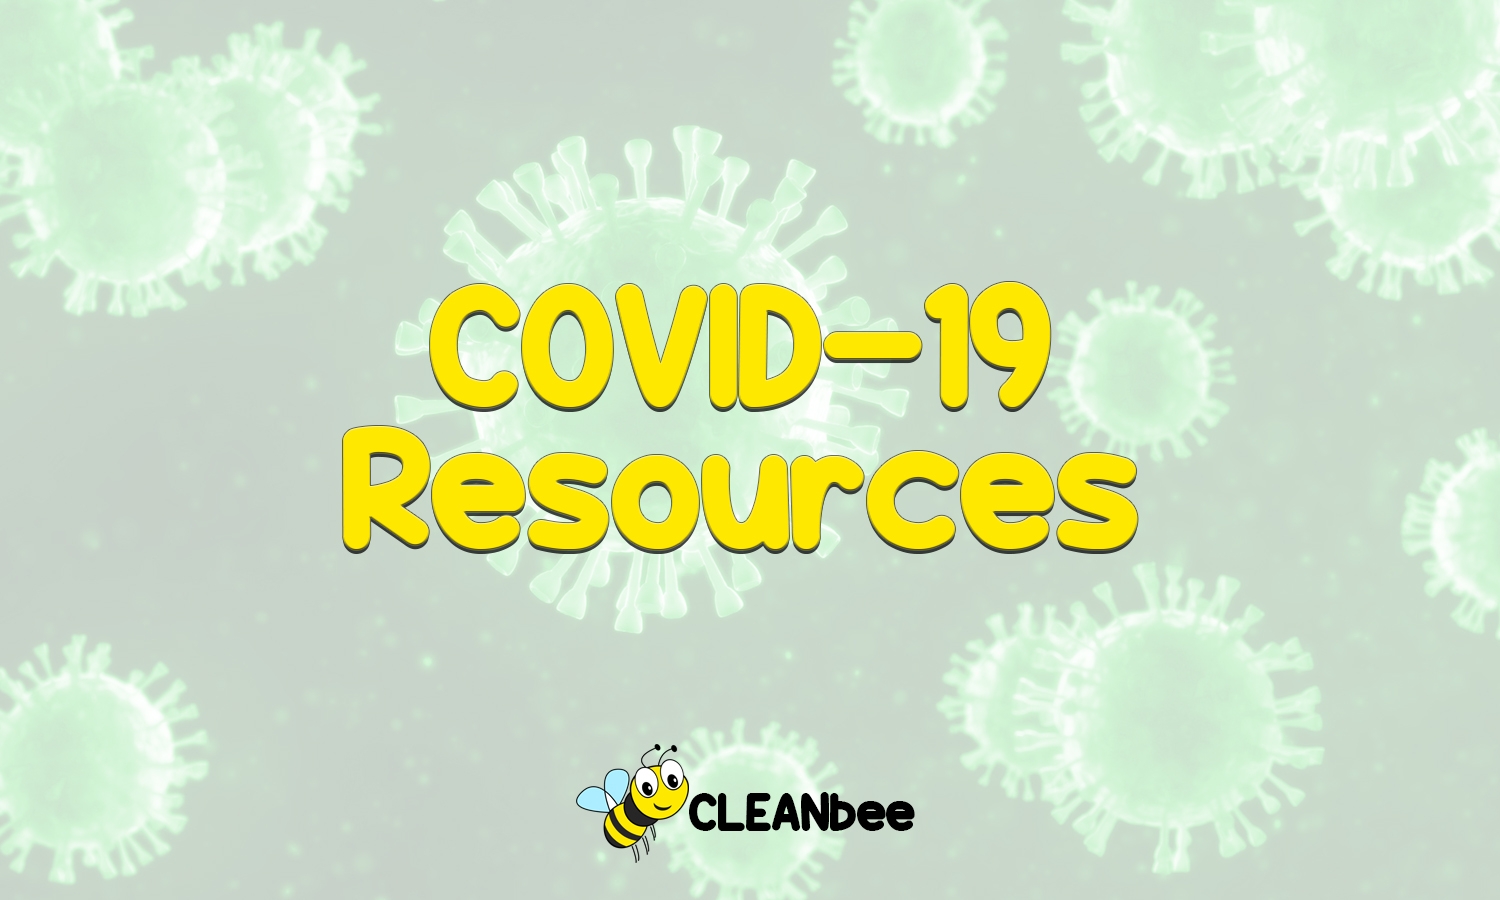 COVD-19 Resources